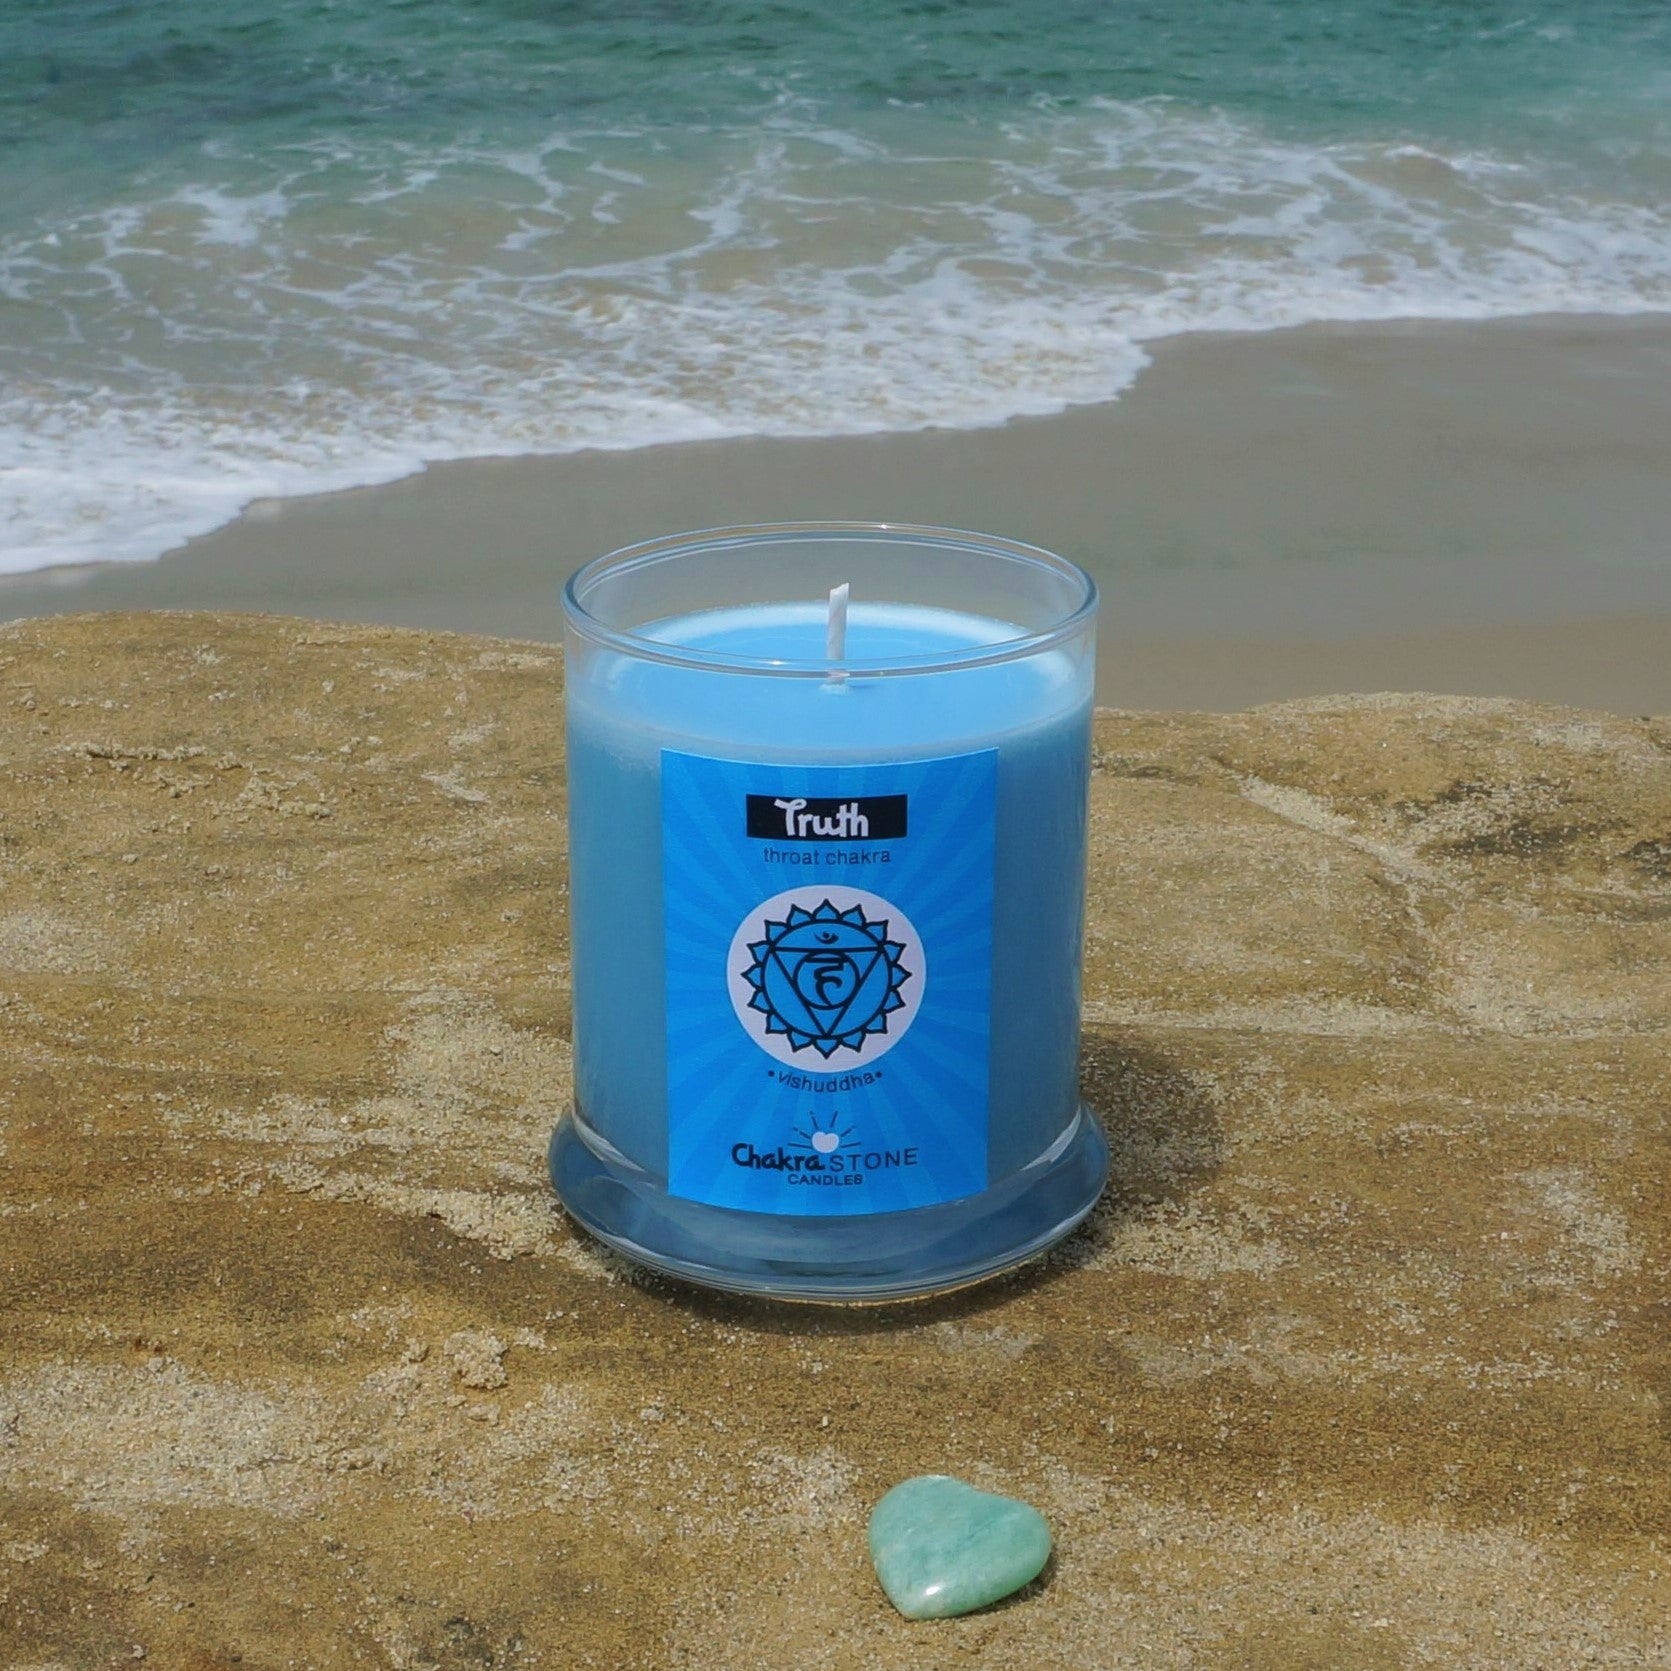 Truth - Throat Chakra Candle